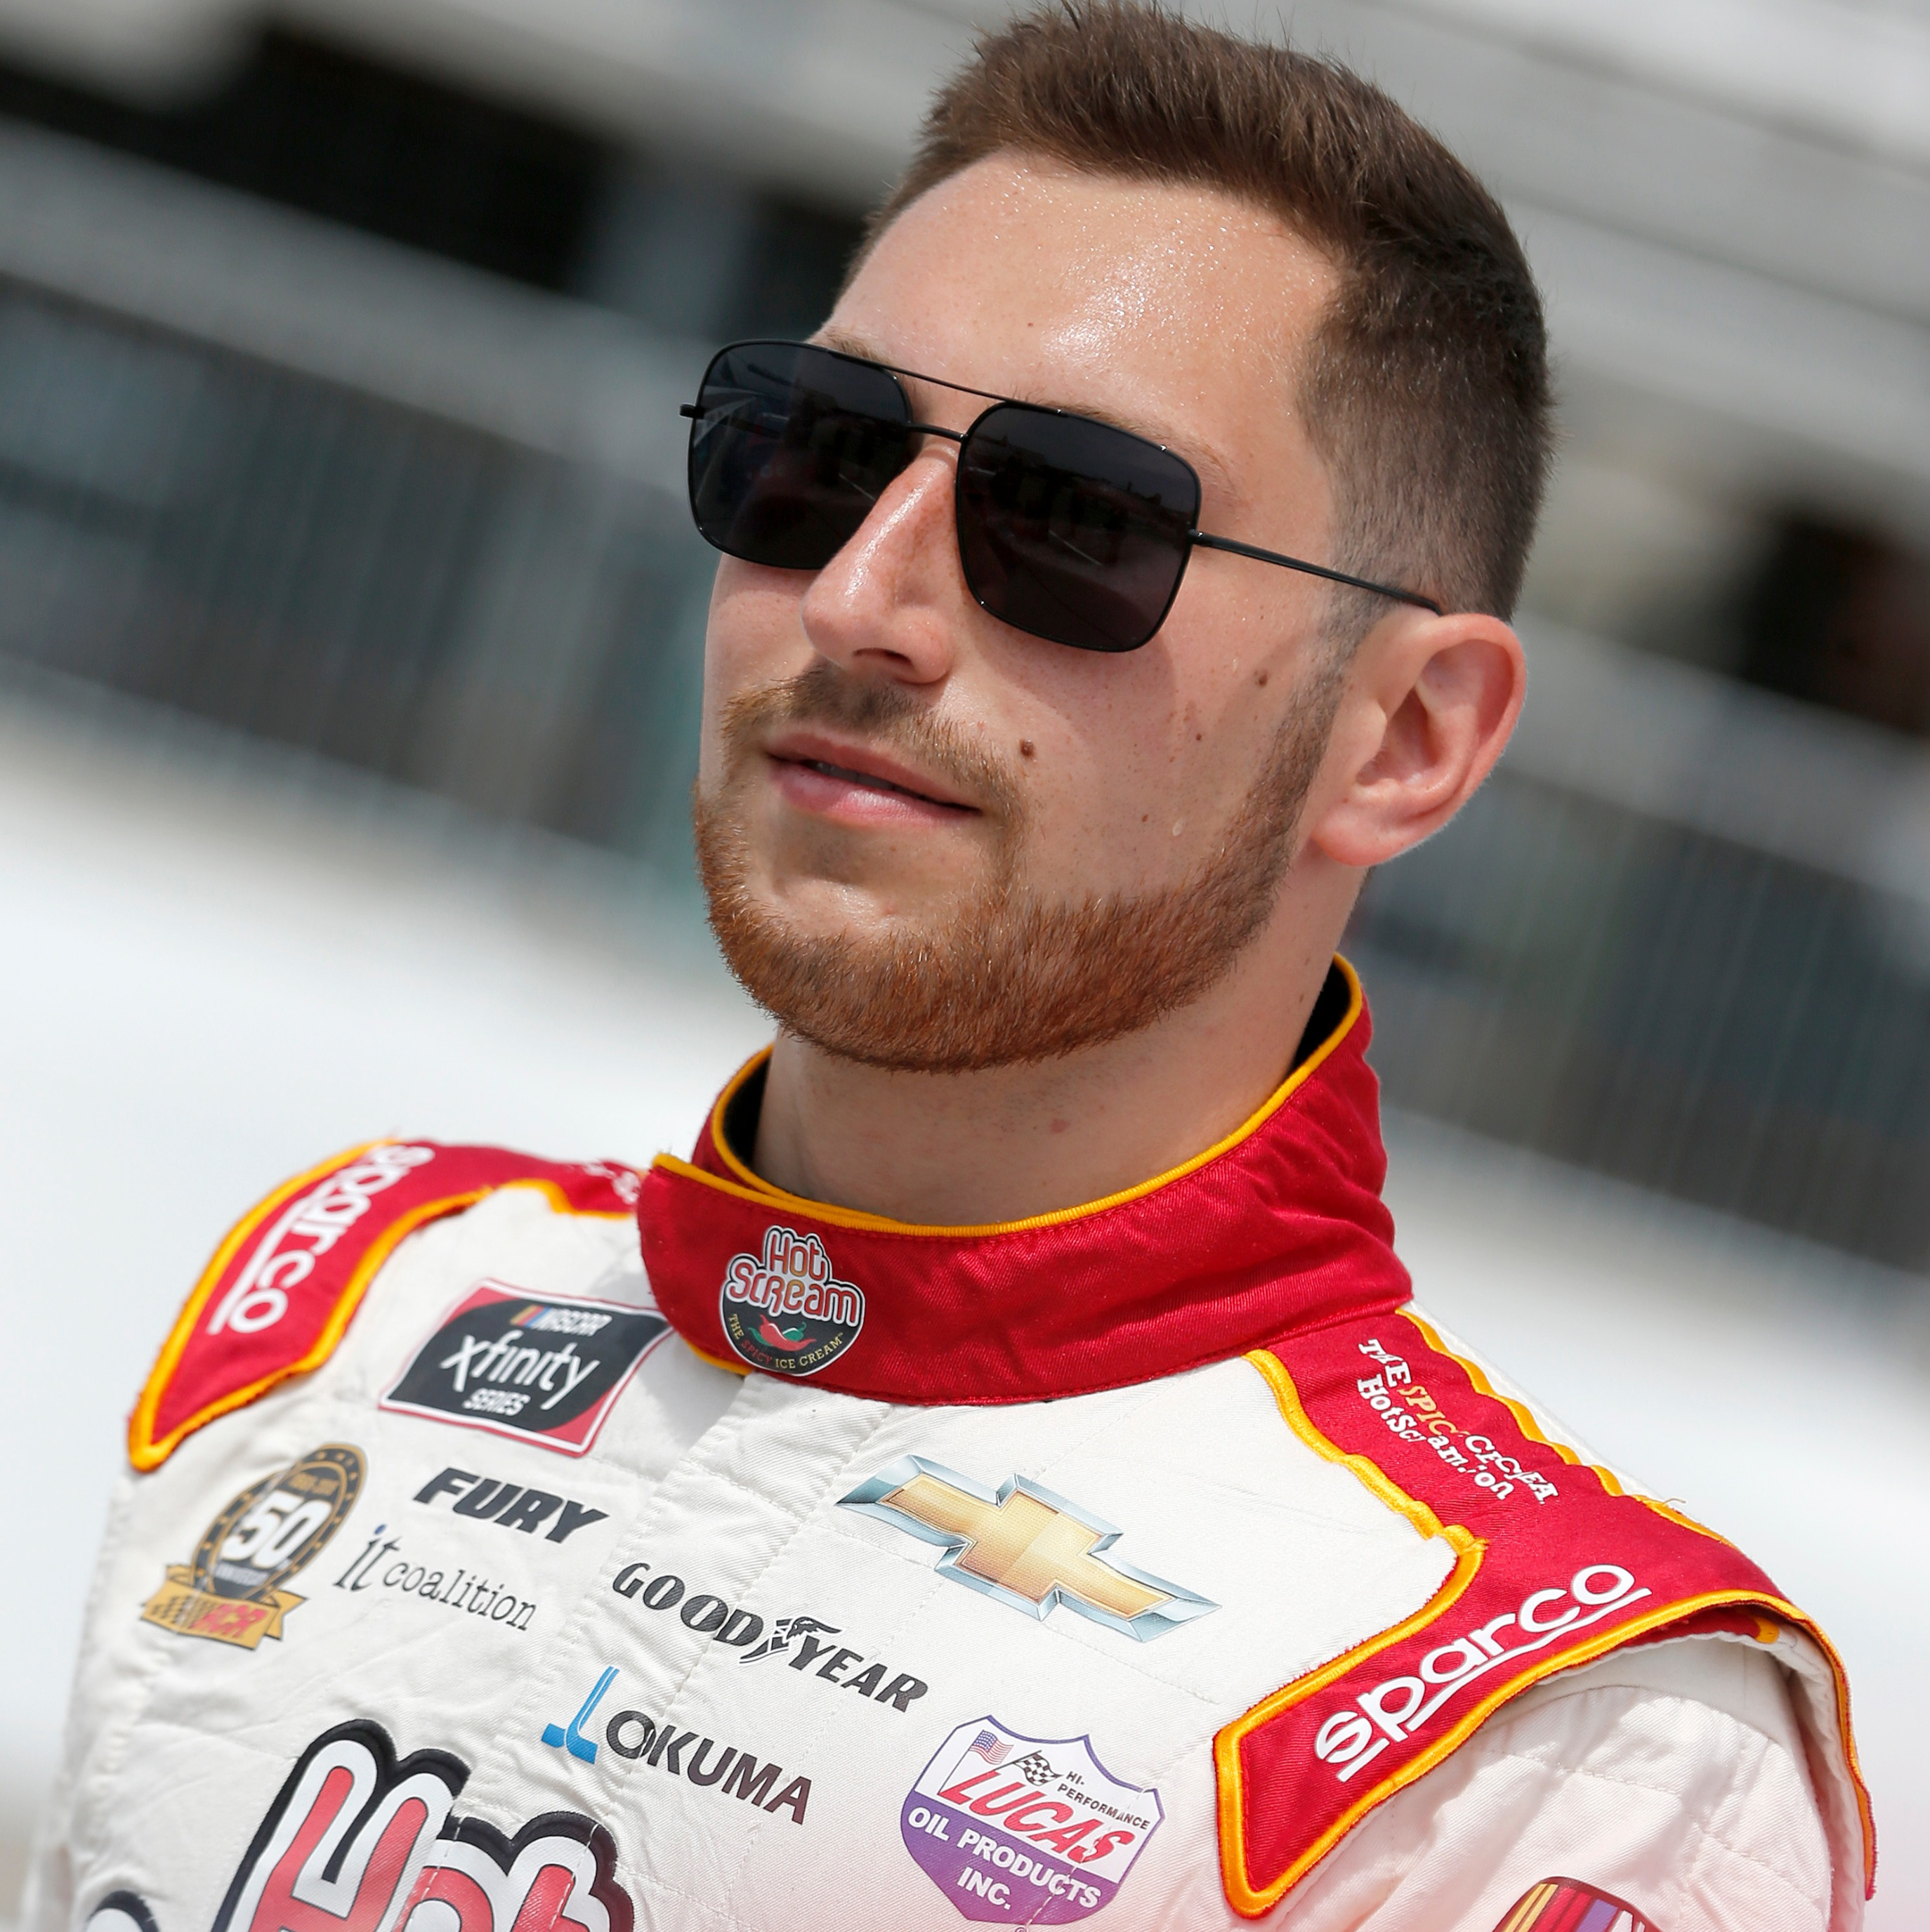 NASCAR X-finity driver Kaz Grala talks racing, spicy ice cream, and Kiss Cover bands with Otto